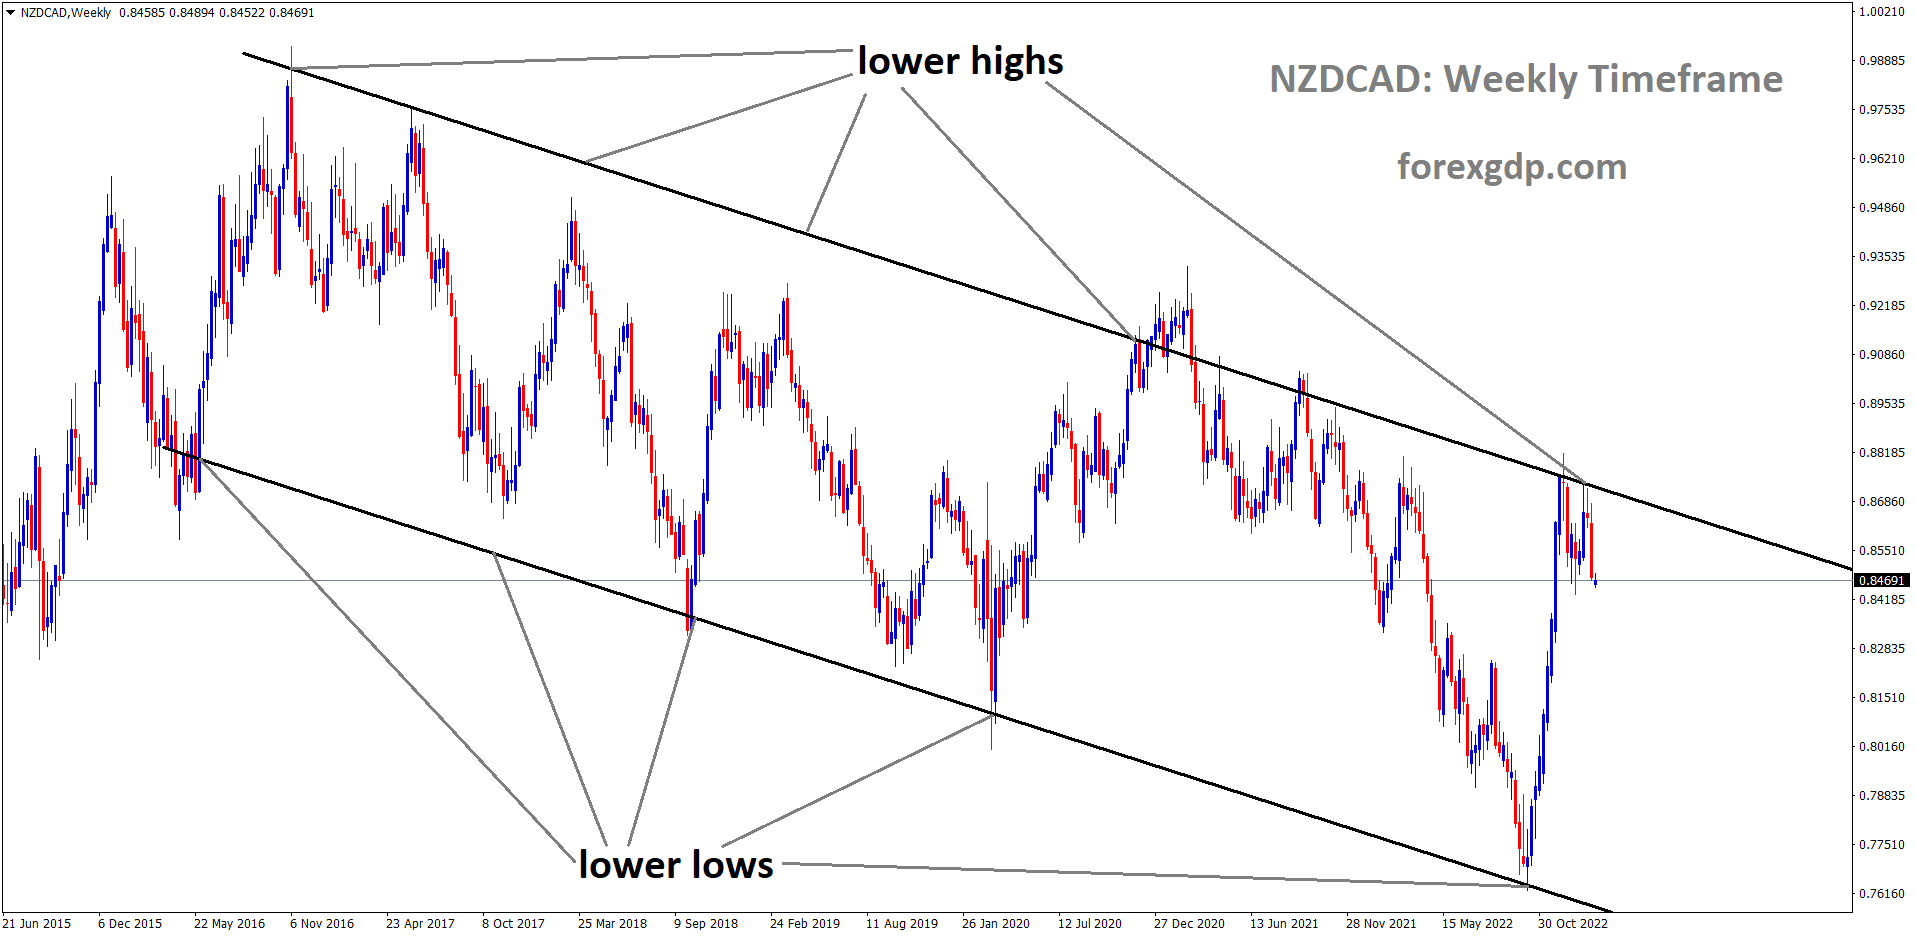 NZDCAD is moving in Descending Channel and the market has fallen from the lower high area of the channel.